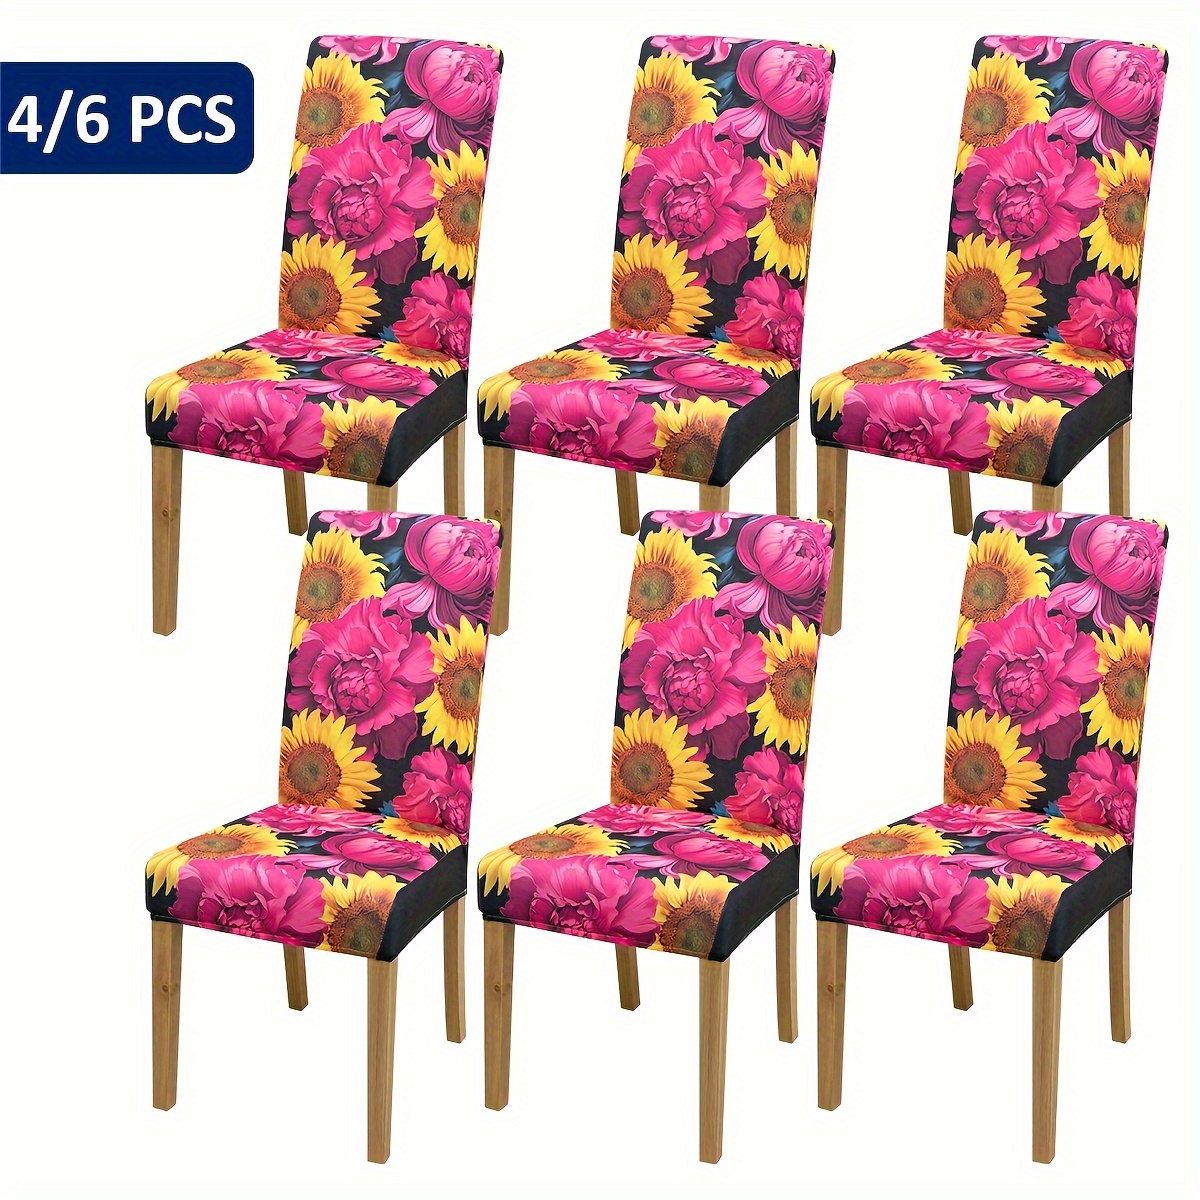 

4/6pcs Flower Pattern Chair Slipcovers, Dining Chair Cover, Furniture Protective Cover, For Dining Room Living Room Restaurant Home Decor